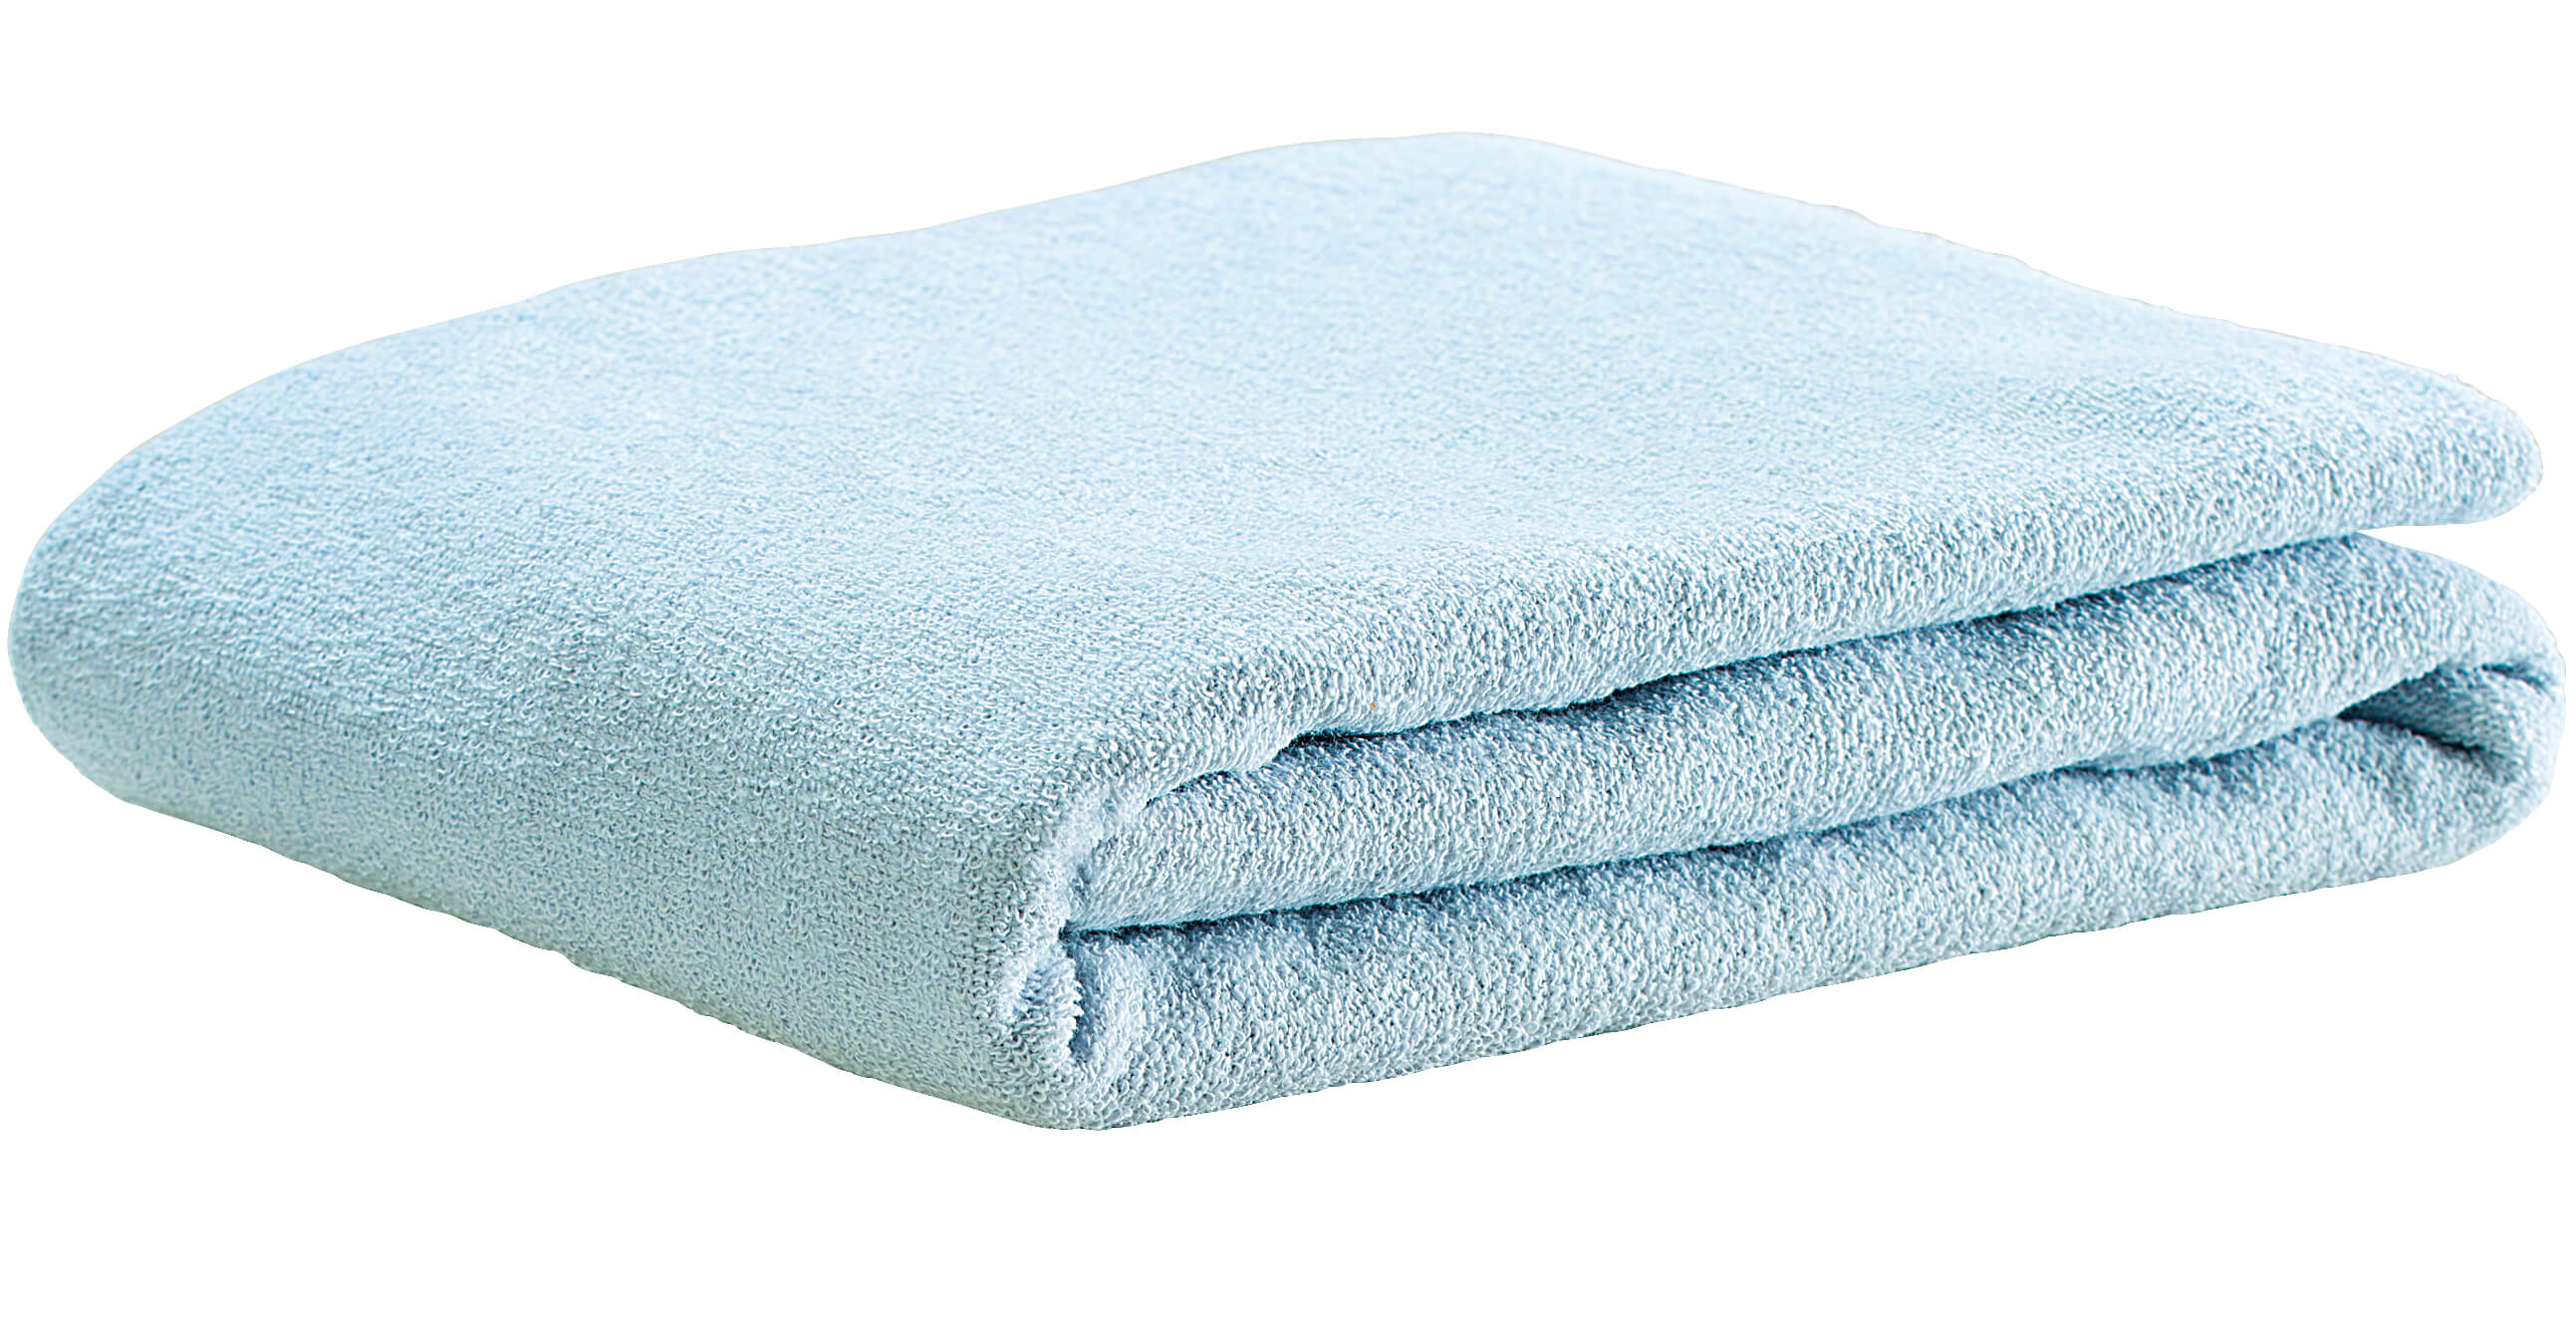 Best Fitted Sheets Manufacturers in Pakistan